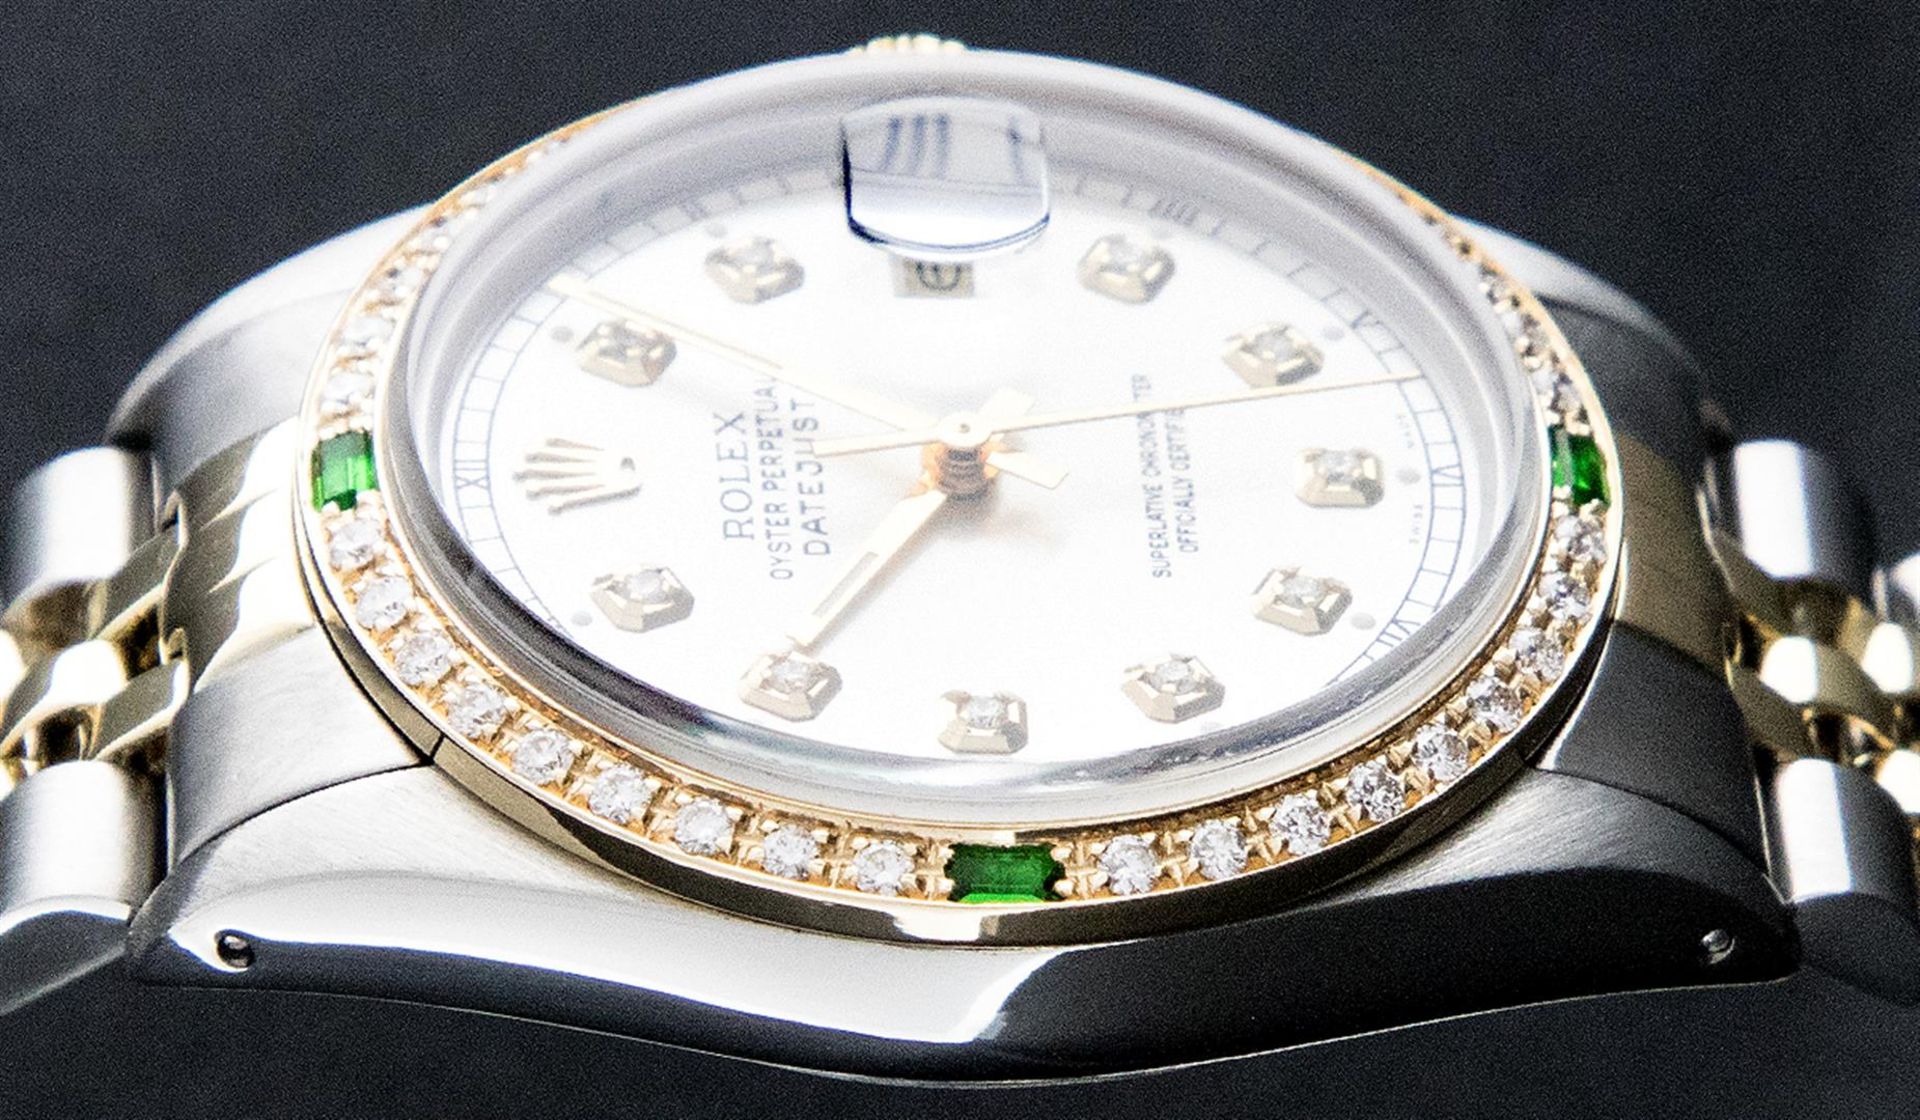 Rolex Mens 2 Tone Silver & Emerald Diamond 36 Oyster Perpetual Datejust Wriswatc - Image 3 of 9